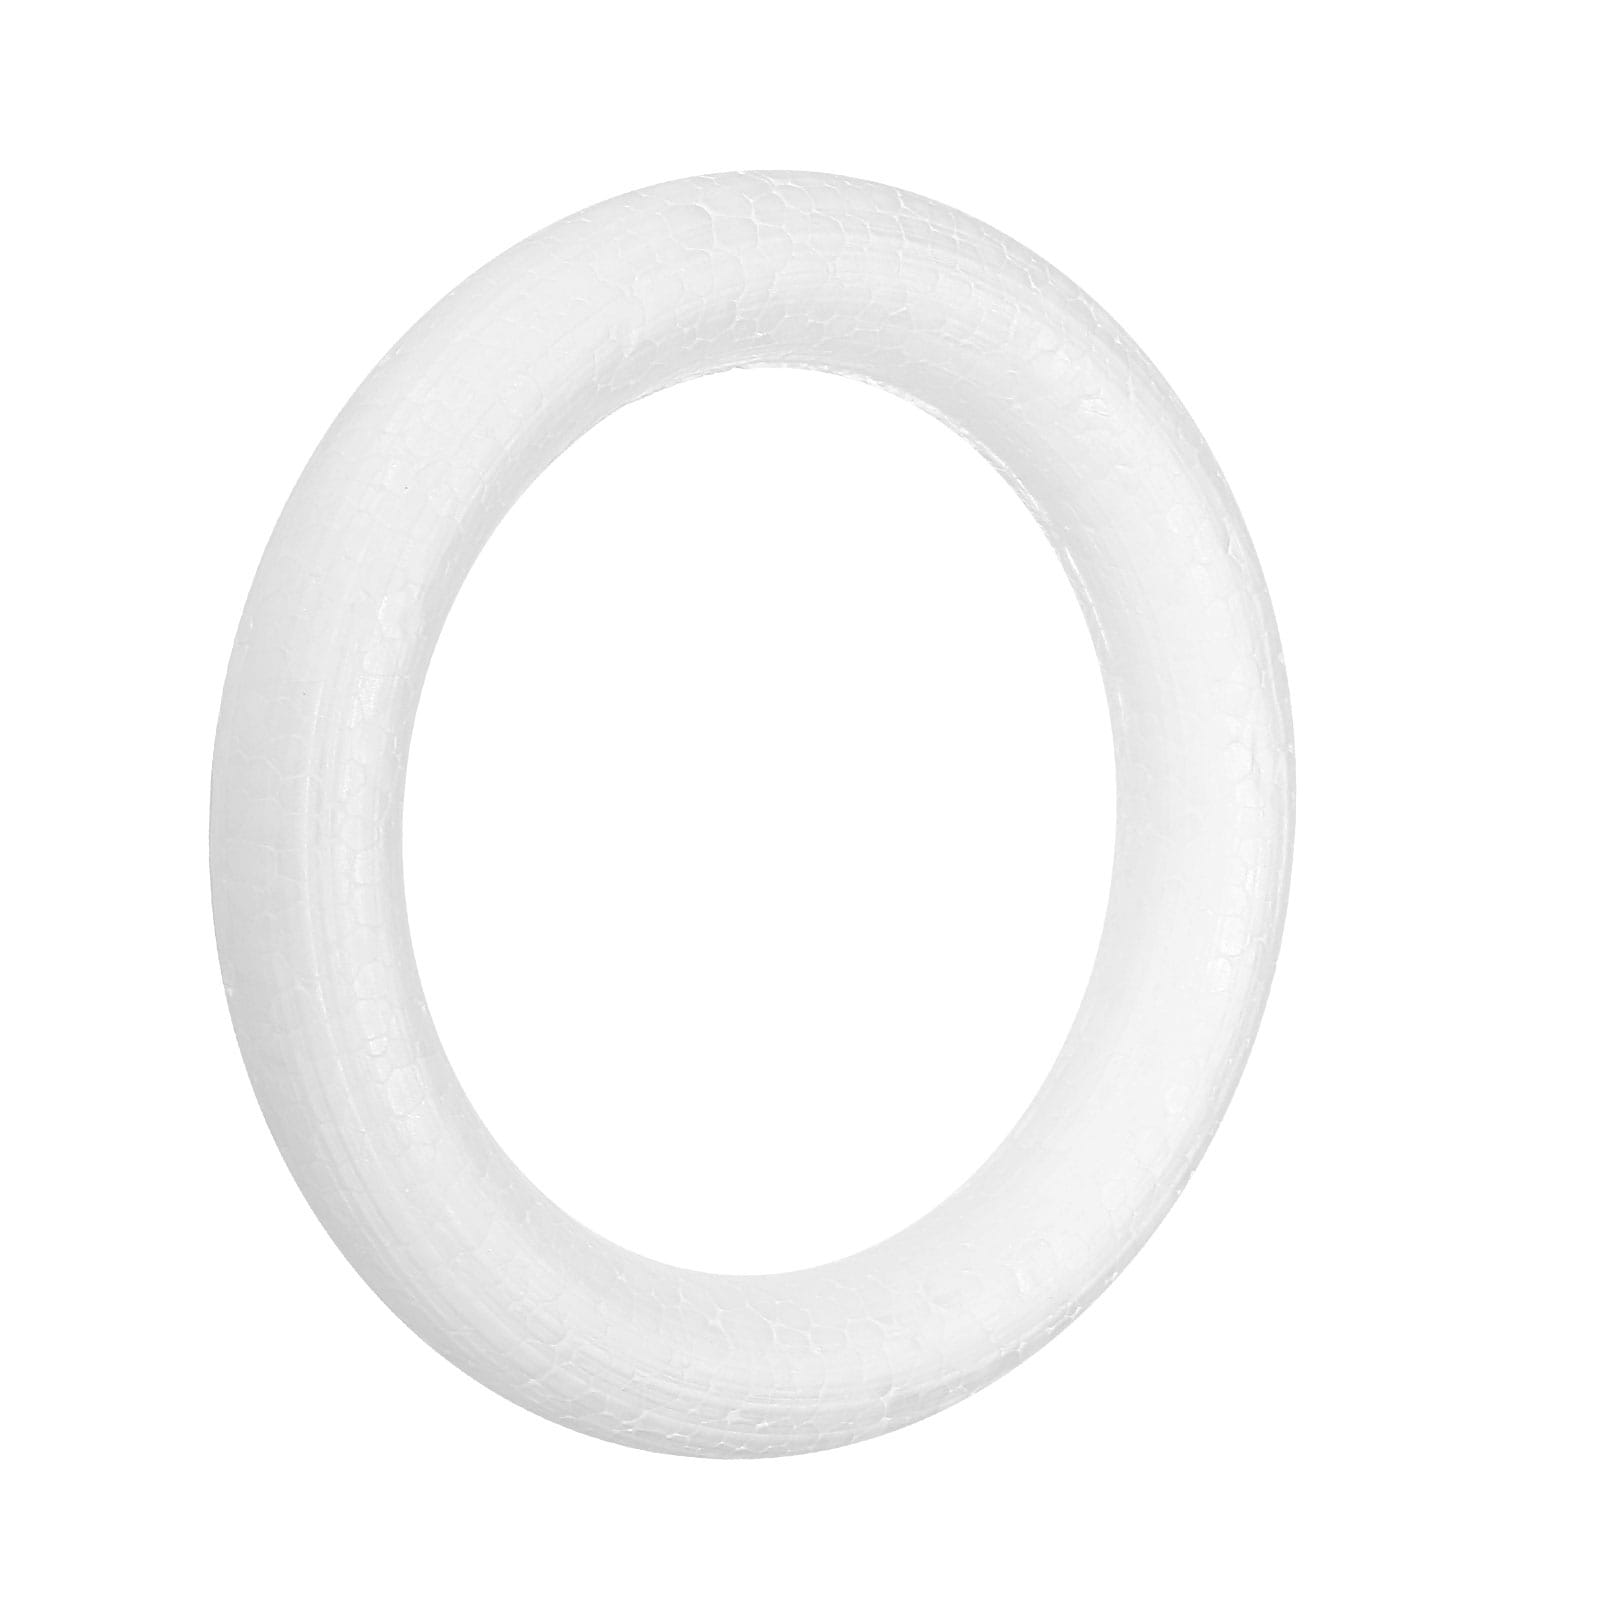 2.8 inch Foam Wreath Forms Round Craft Rings for DIY Art Florists Pack of 1 - White